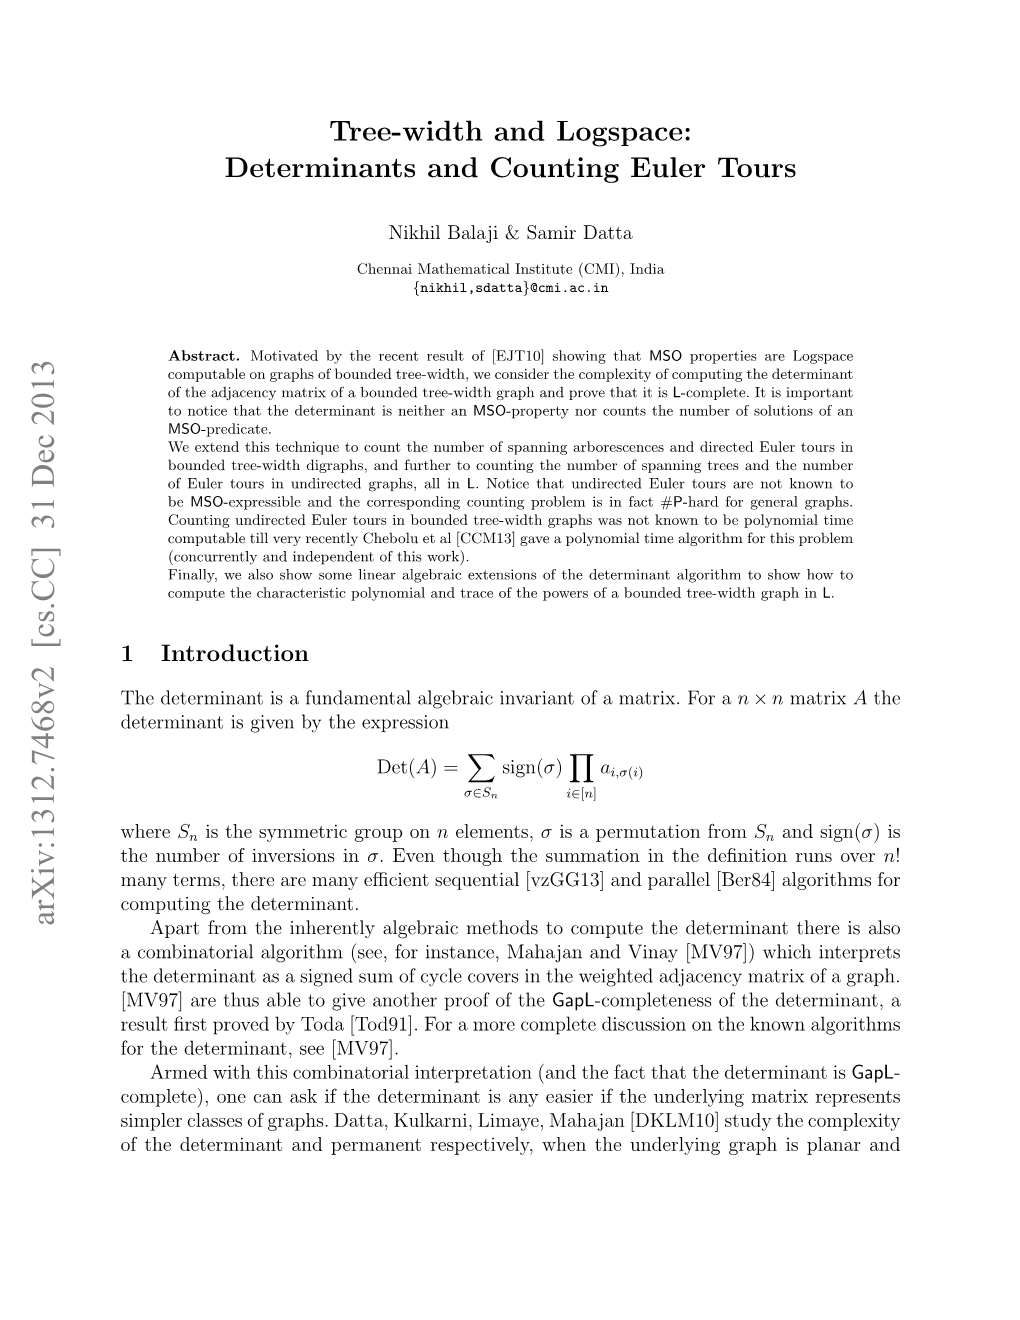 Tree-Width and Logspace: Determinants and Counting Euler Tours